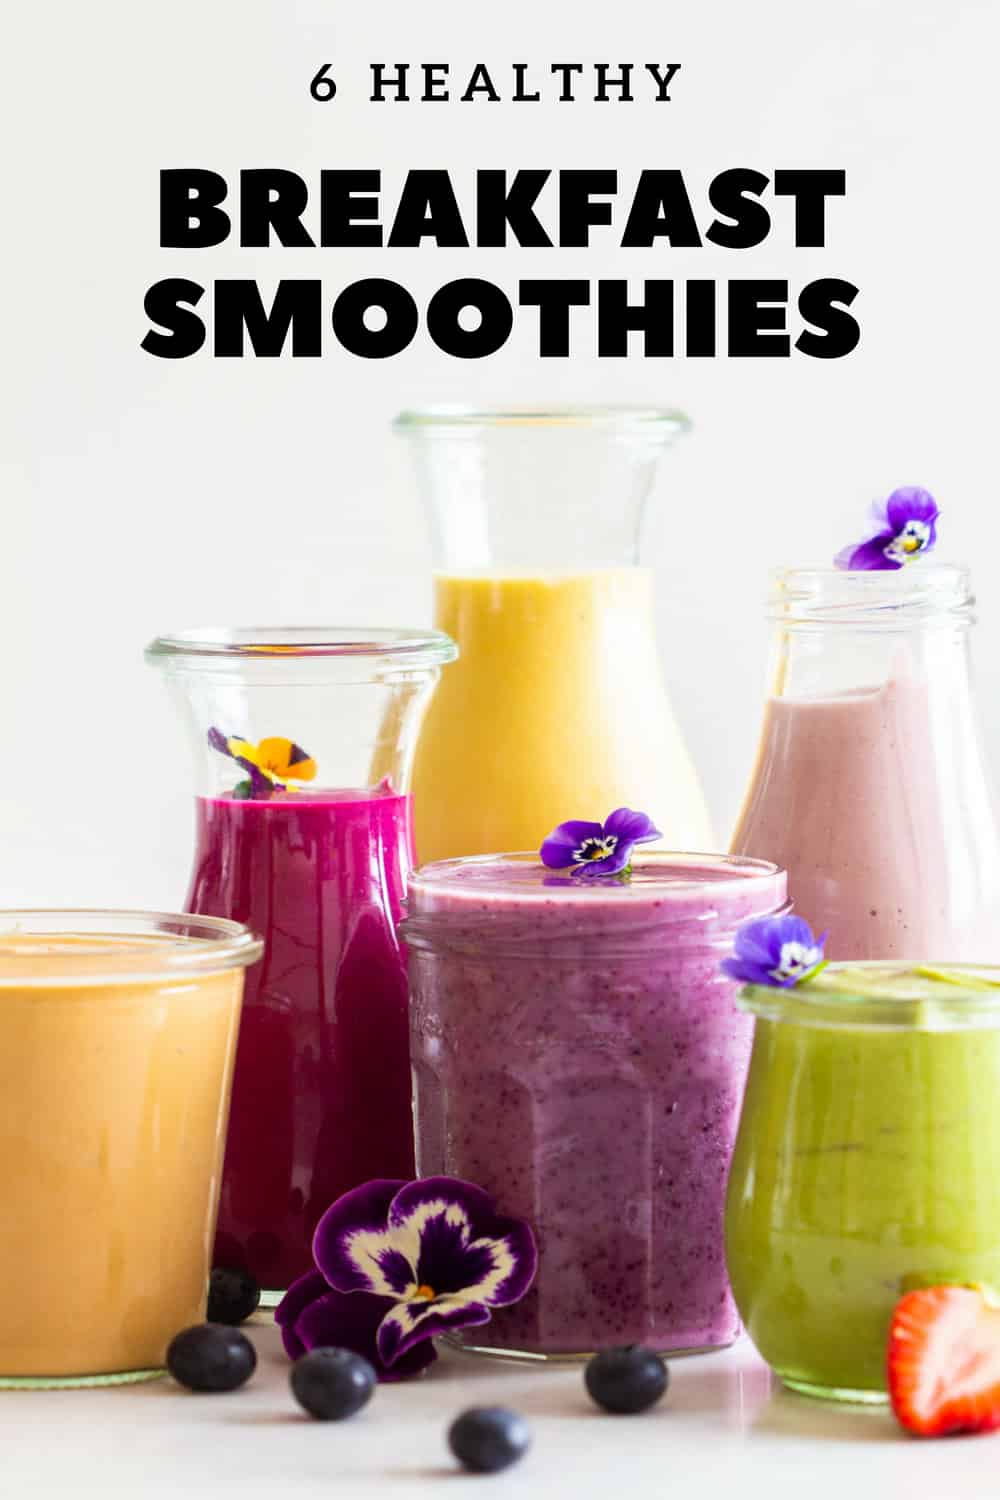 Breakfast Smoothies of all cars in different sized jars and glasses.